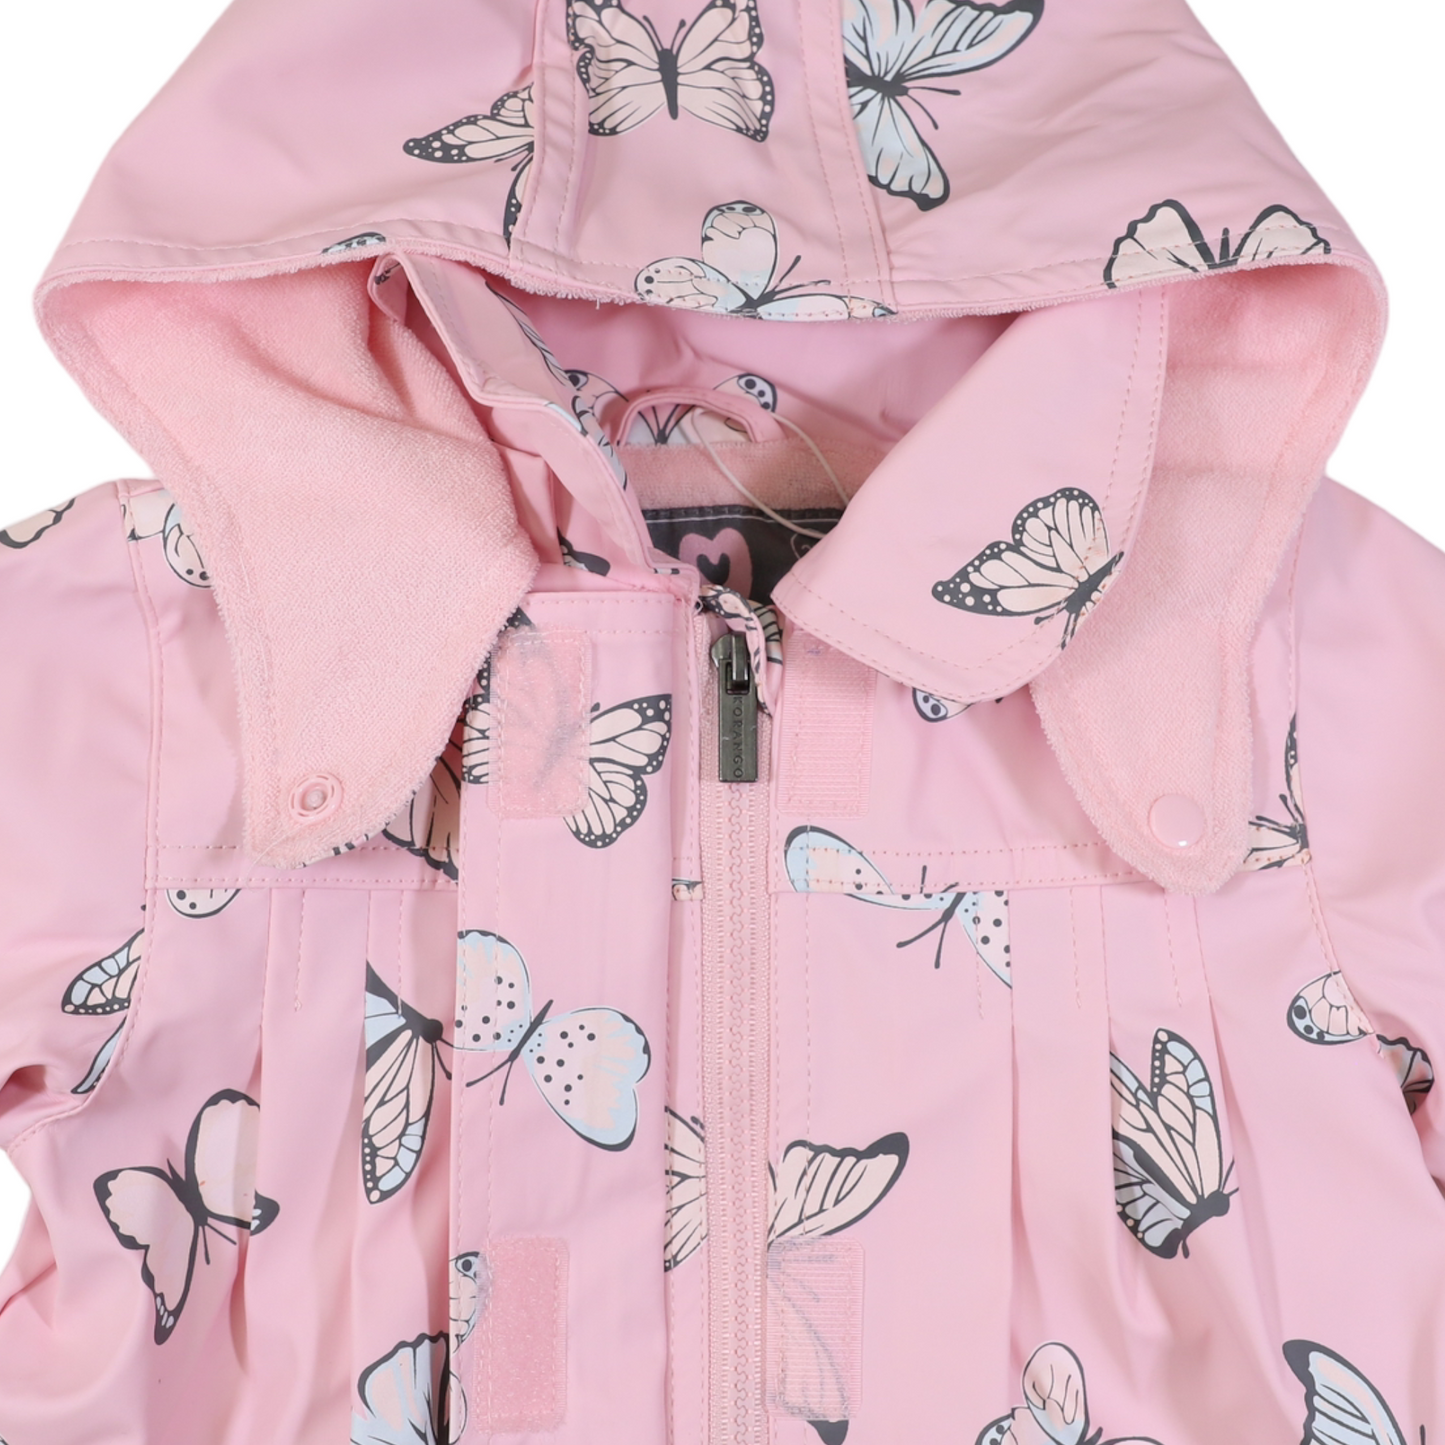 Korango Butterfly Colour Change Terry Towelling Lined Raincoat Fairytale Pink